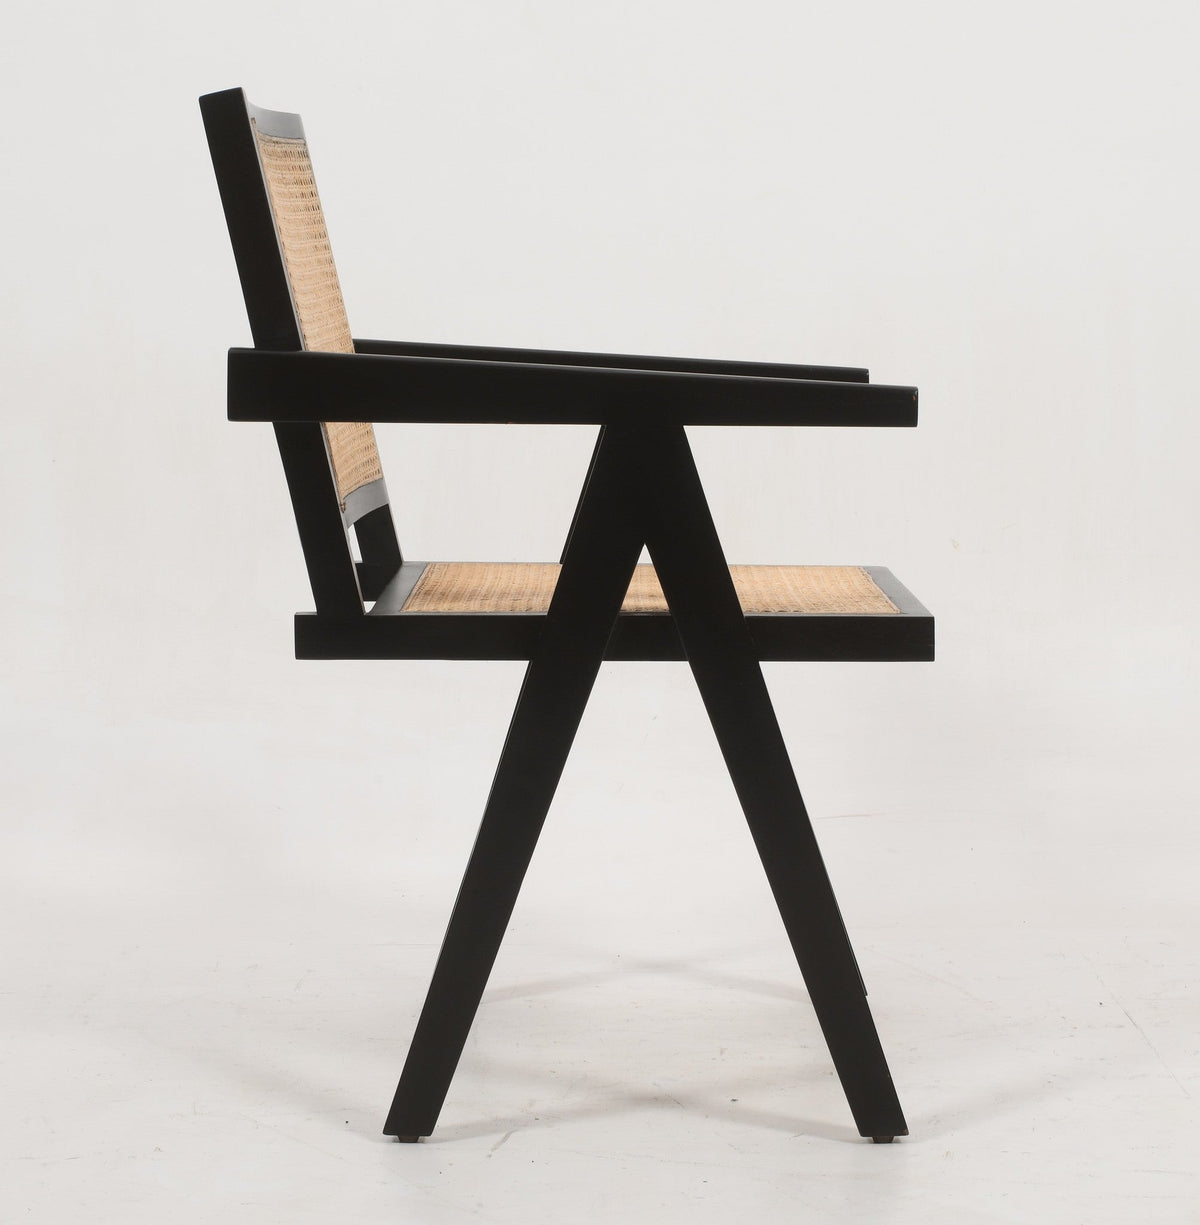 Pierre Jeanneret Solid Acacia Wood Dining Chair with Armrest | Black &amp; Cane Dining Chair Casa Maria Designs 